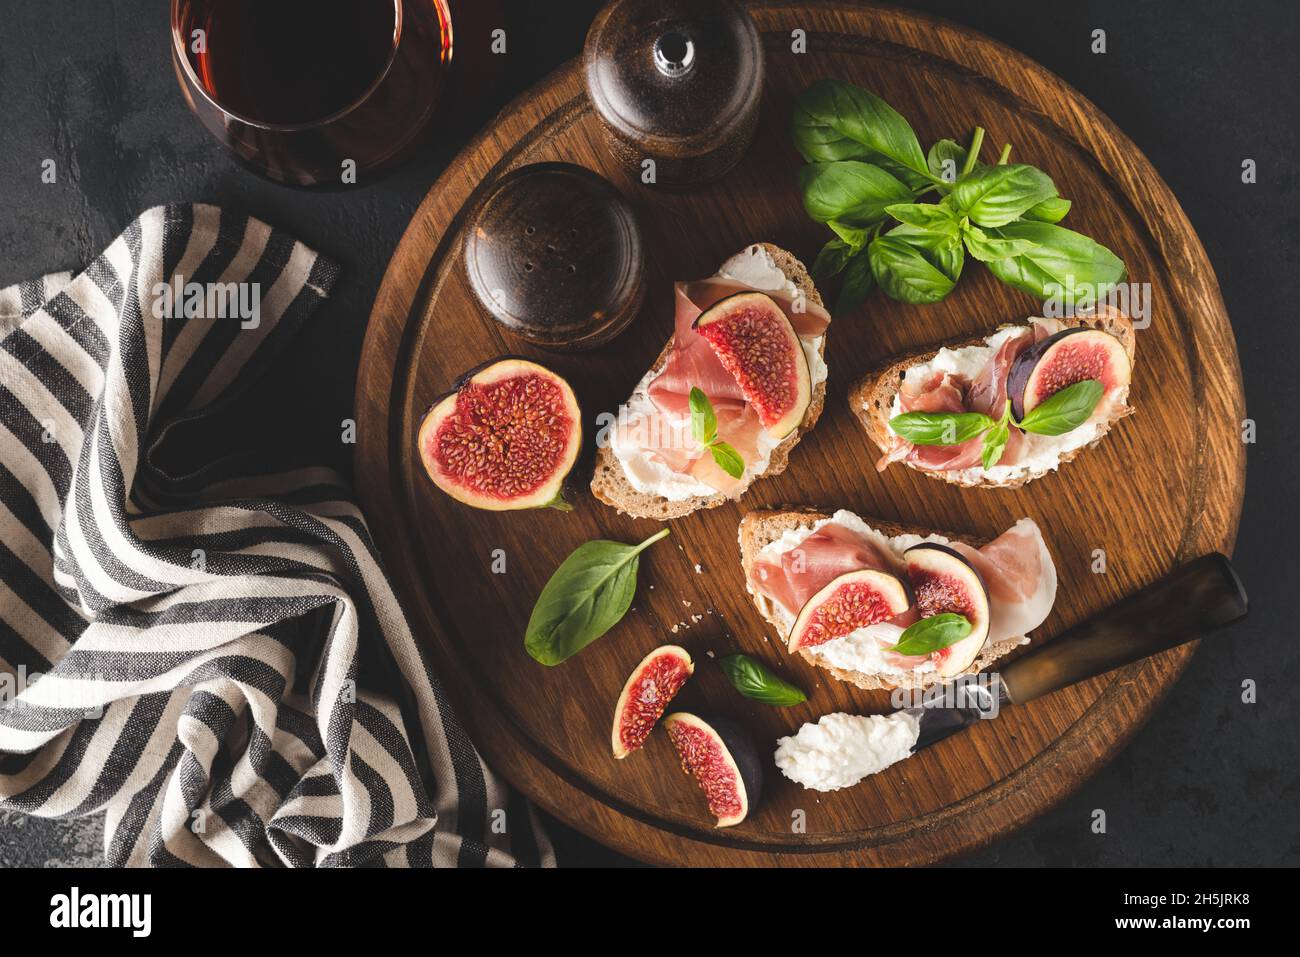 Italian appetizer bruschetta with ham prosciutto, cheese and figs on a wooden serving board, glass of red wine. Top view Stock Photo